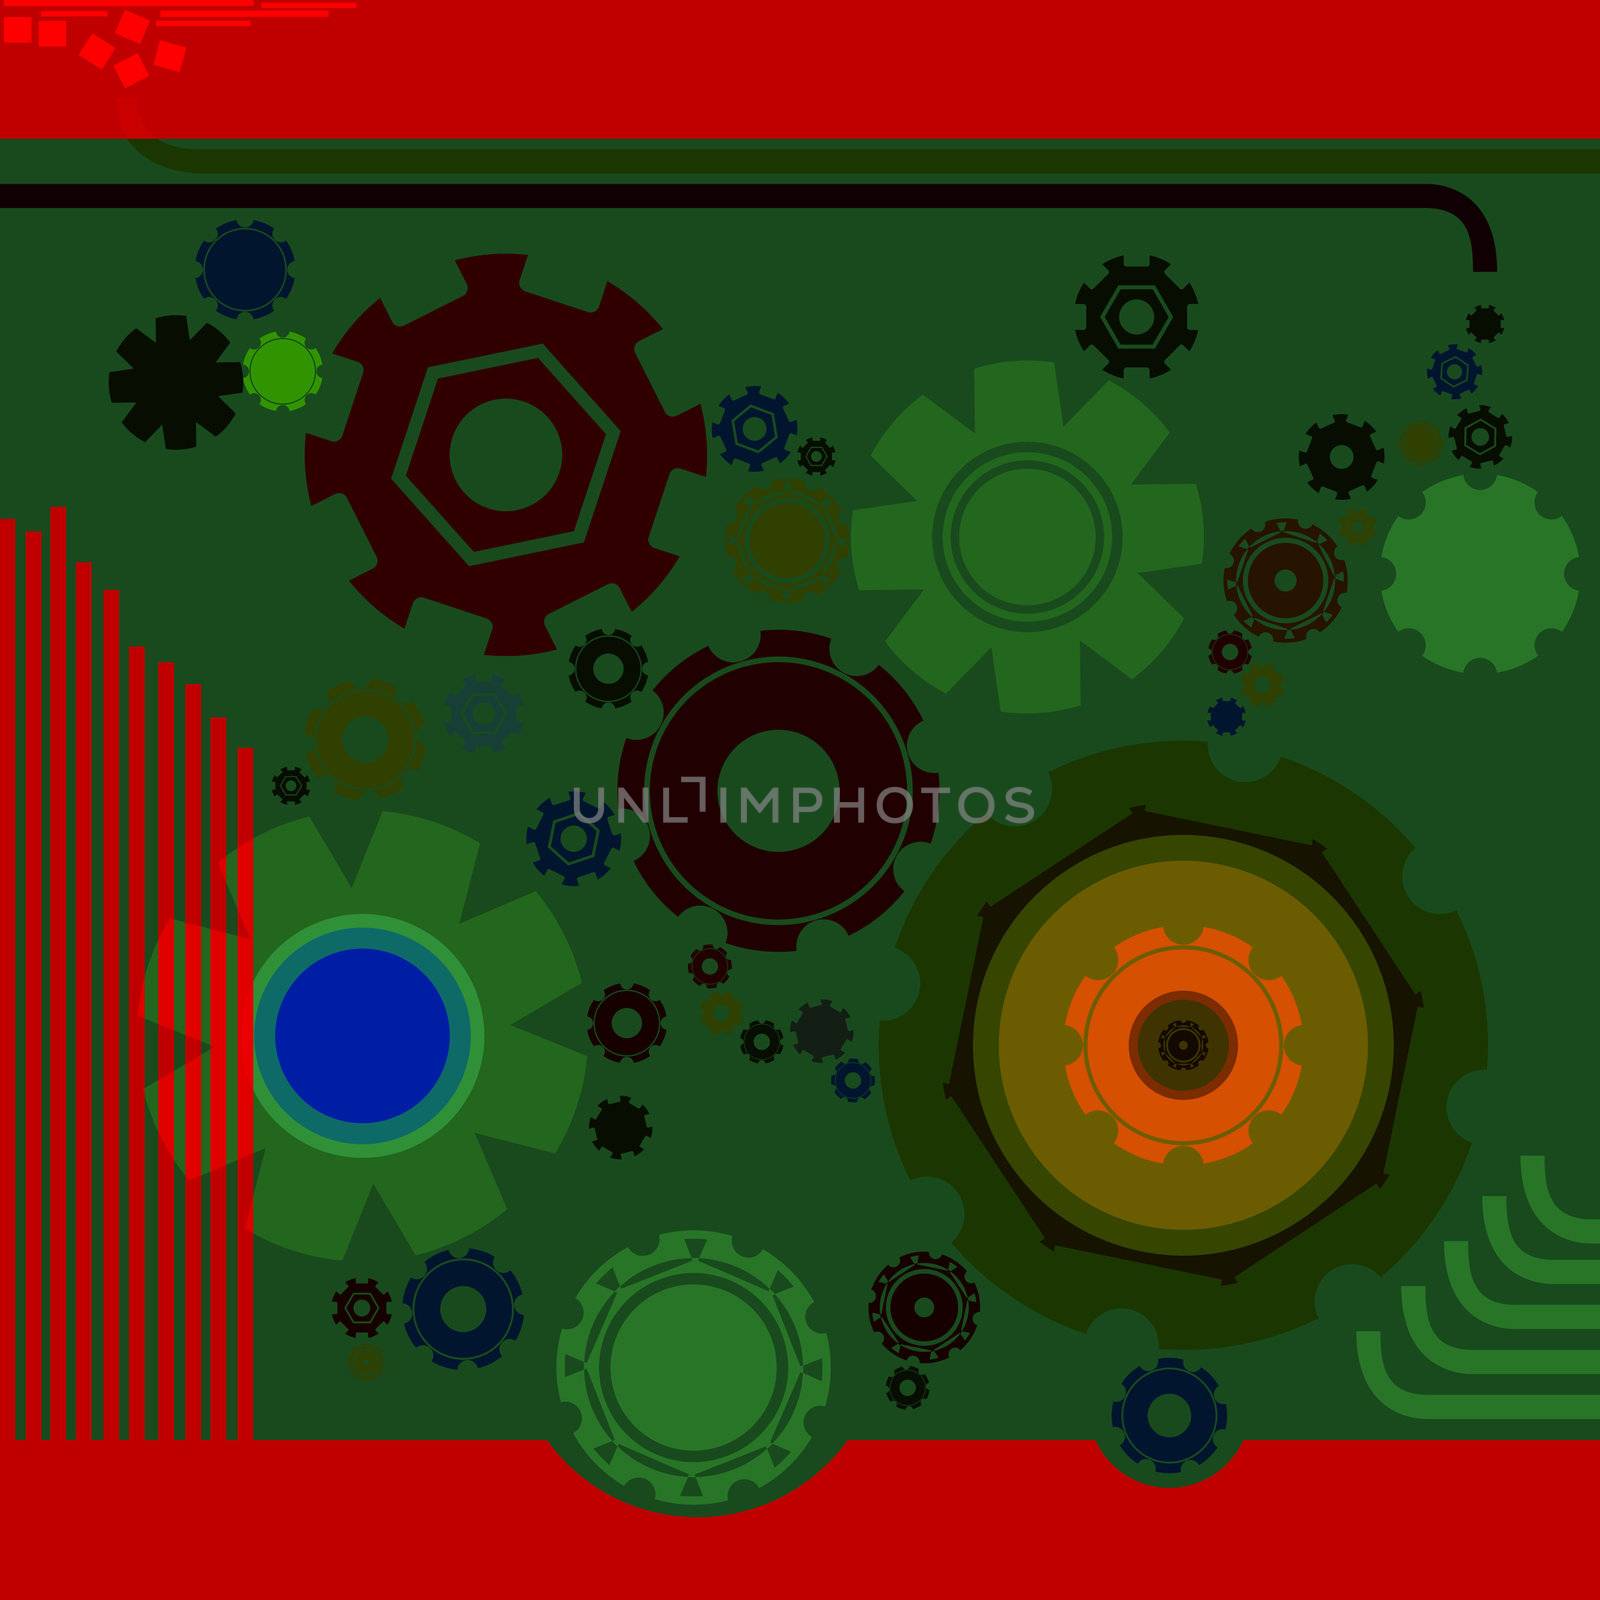 Art deco background with gears